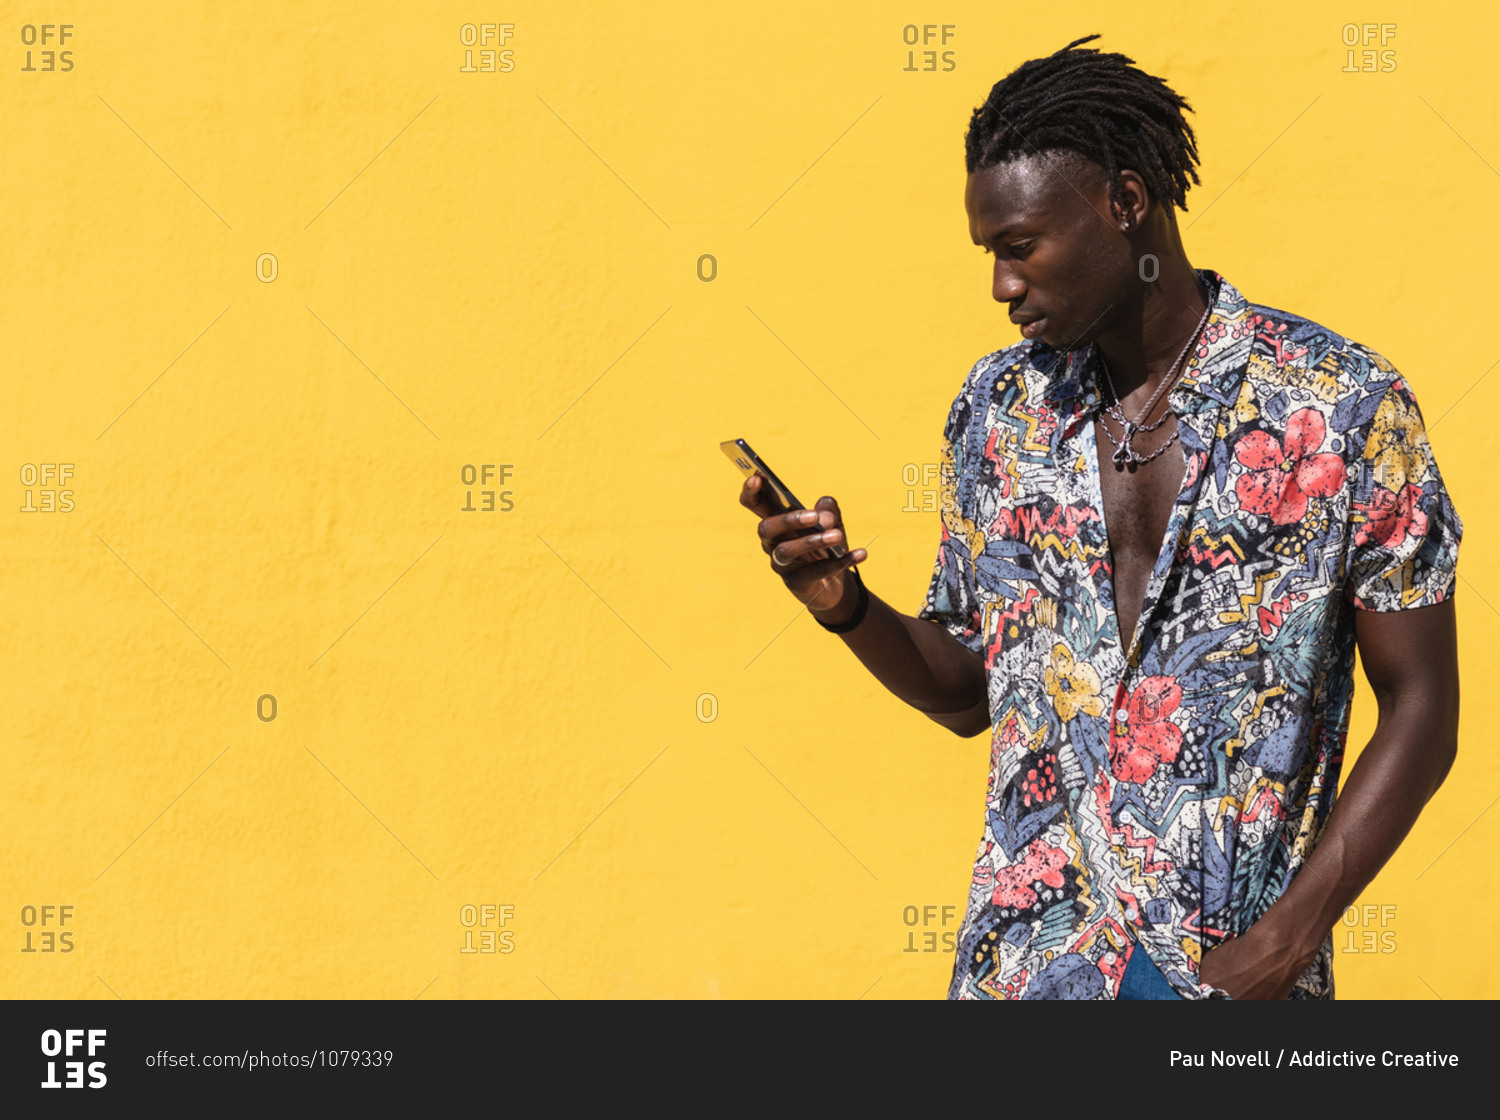 Confident young hipster African American male with dreadlocks wearing trendy summer shirt with floral print and jeans using mobile phone against yellow background